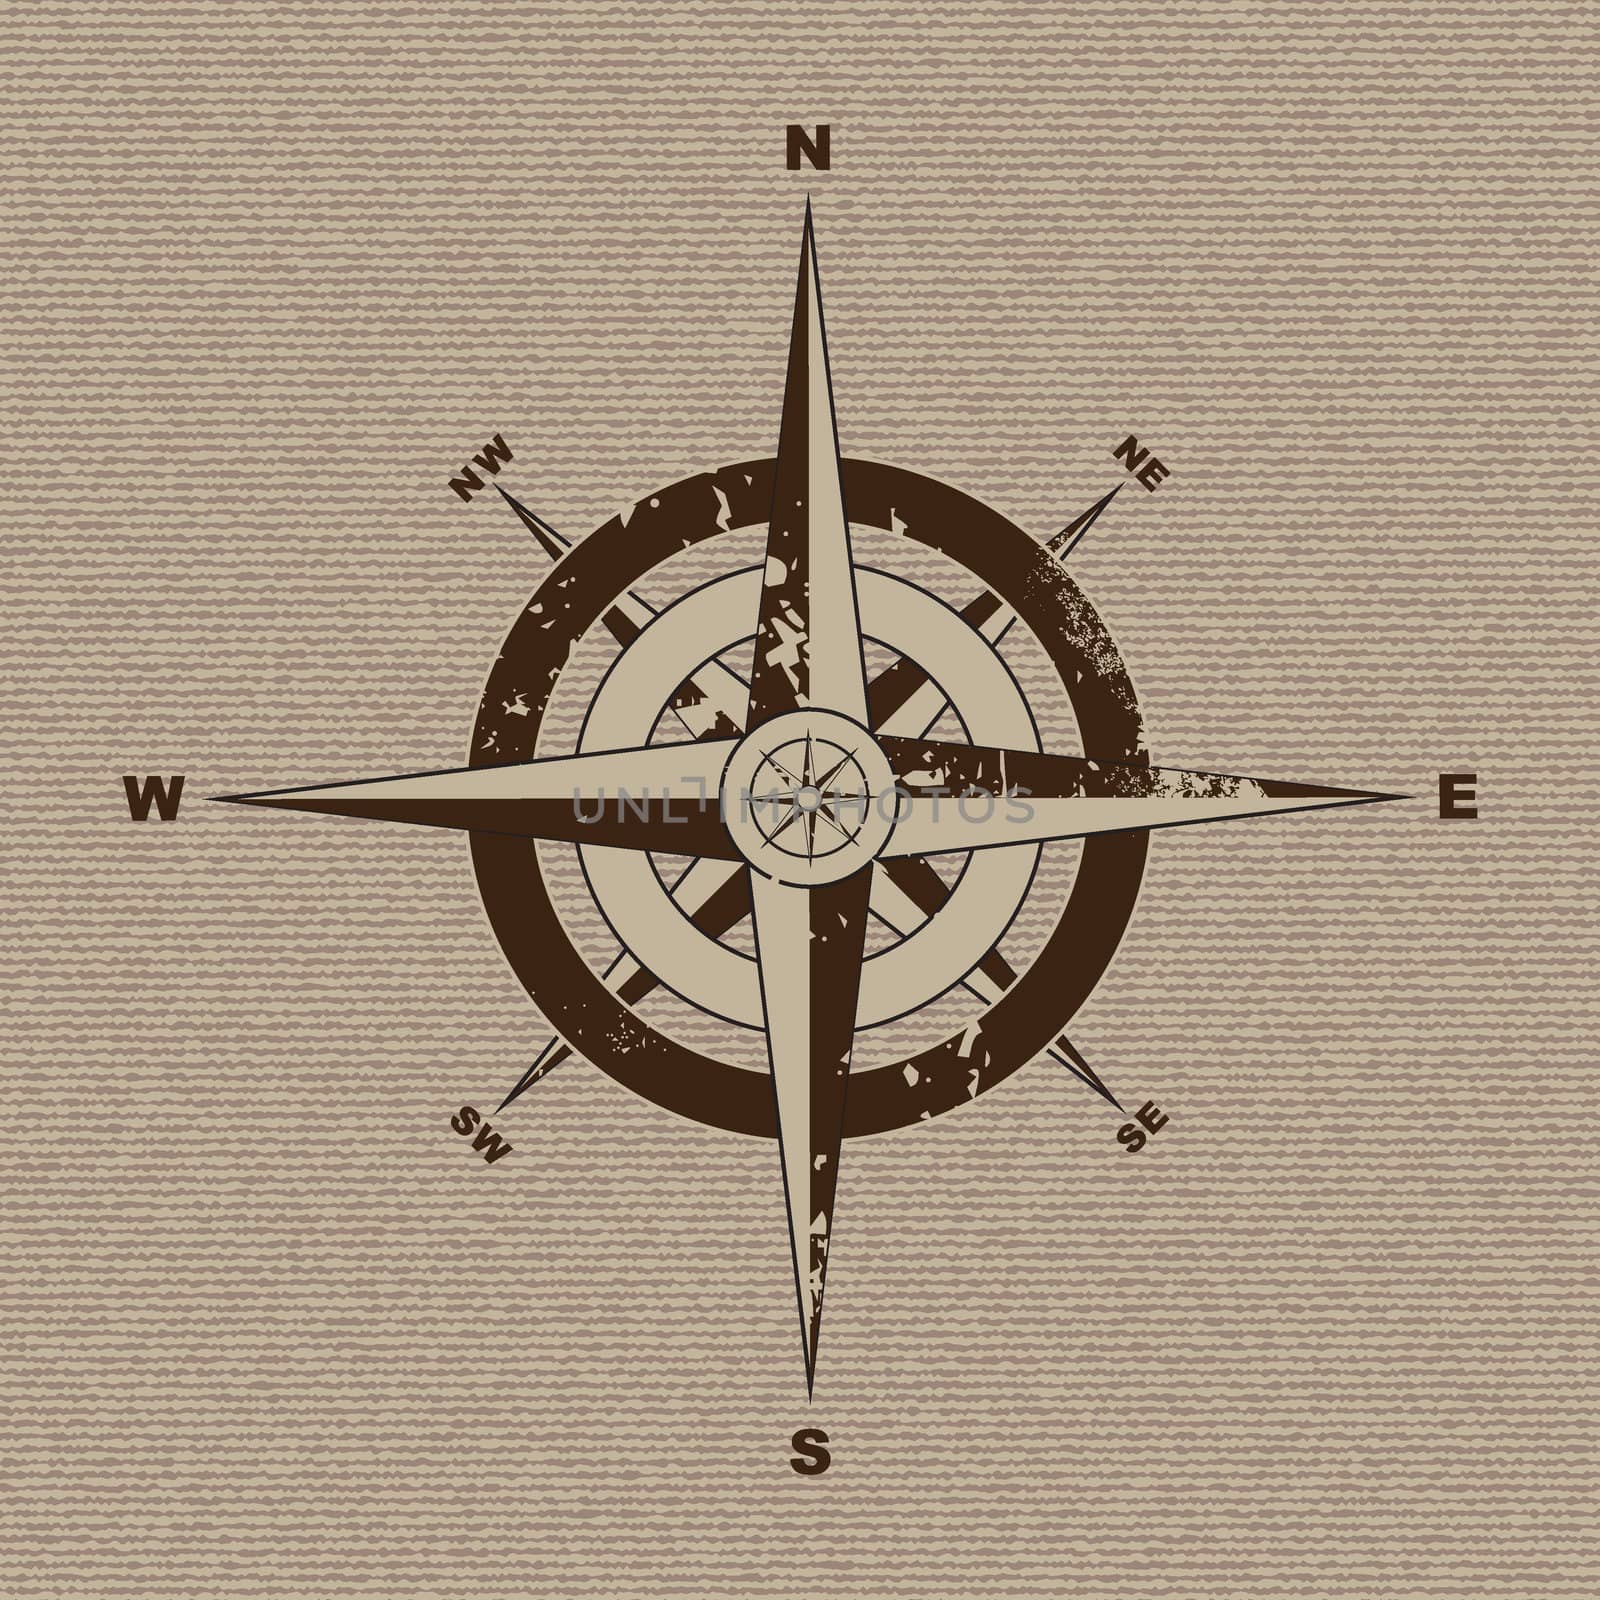 Retro grunge compass with material canvas background in brown